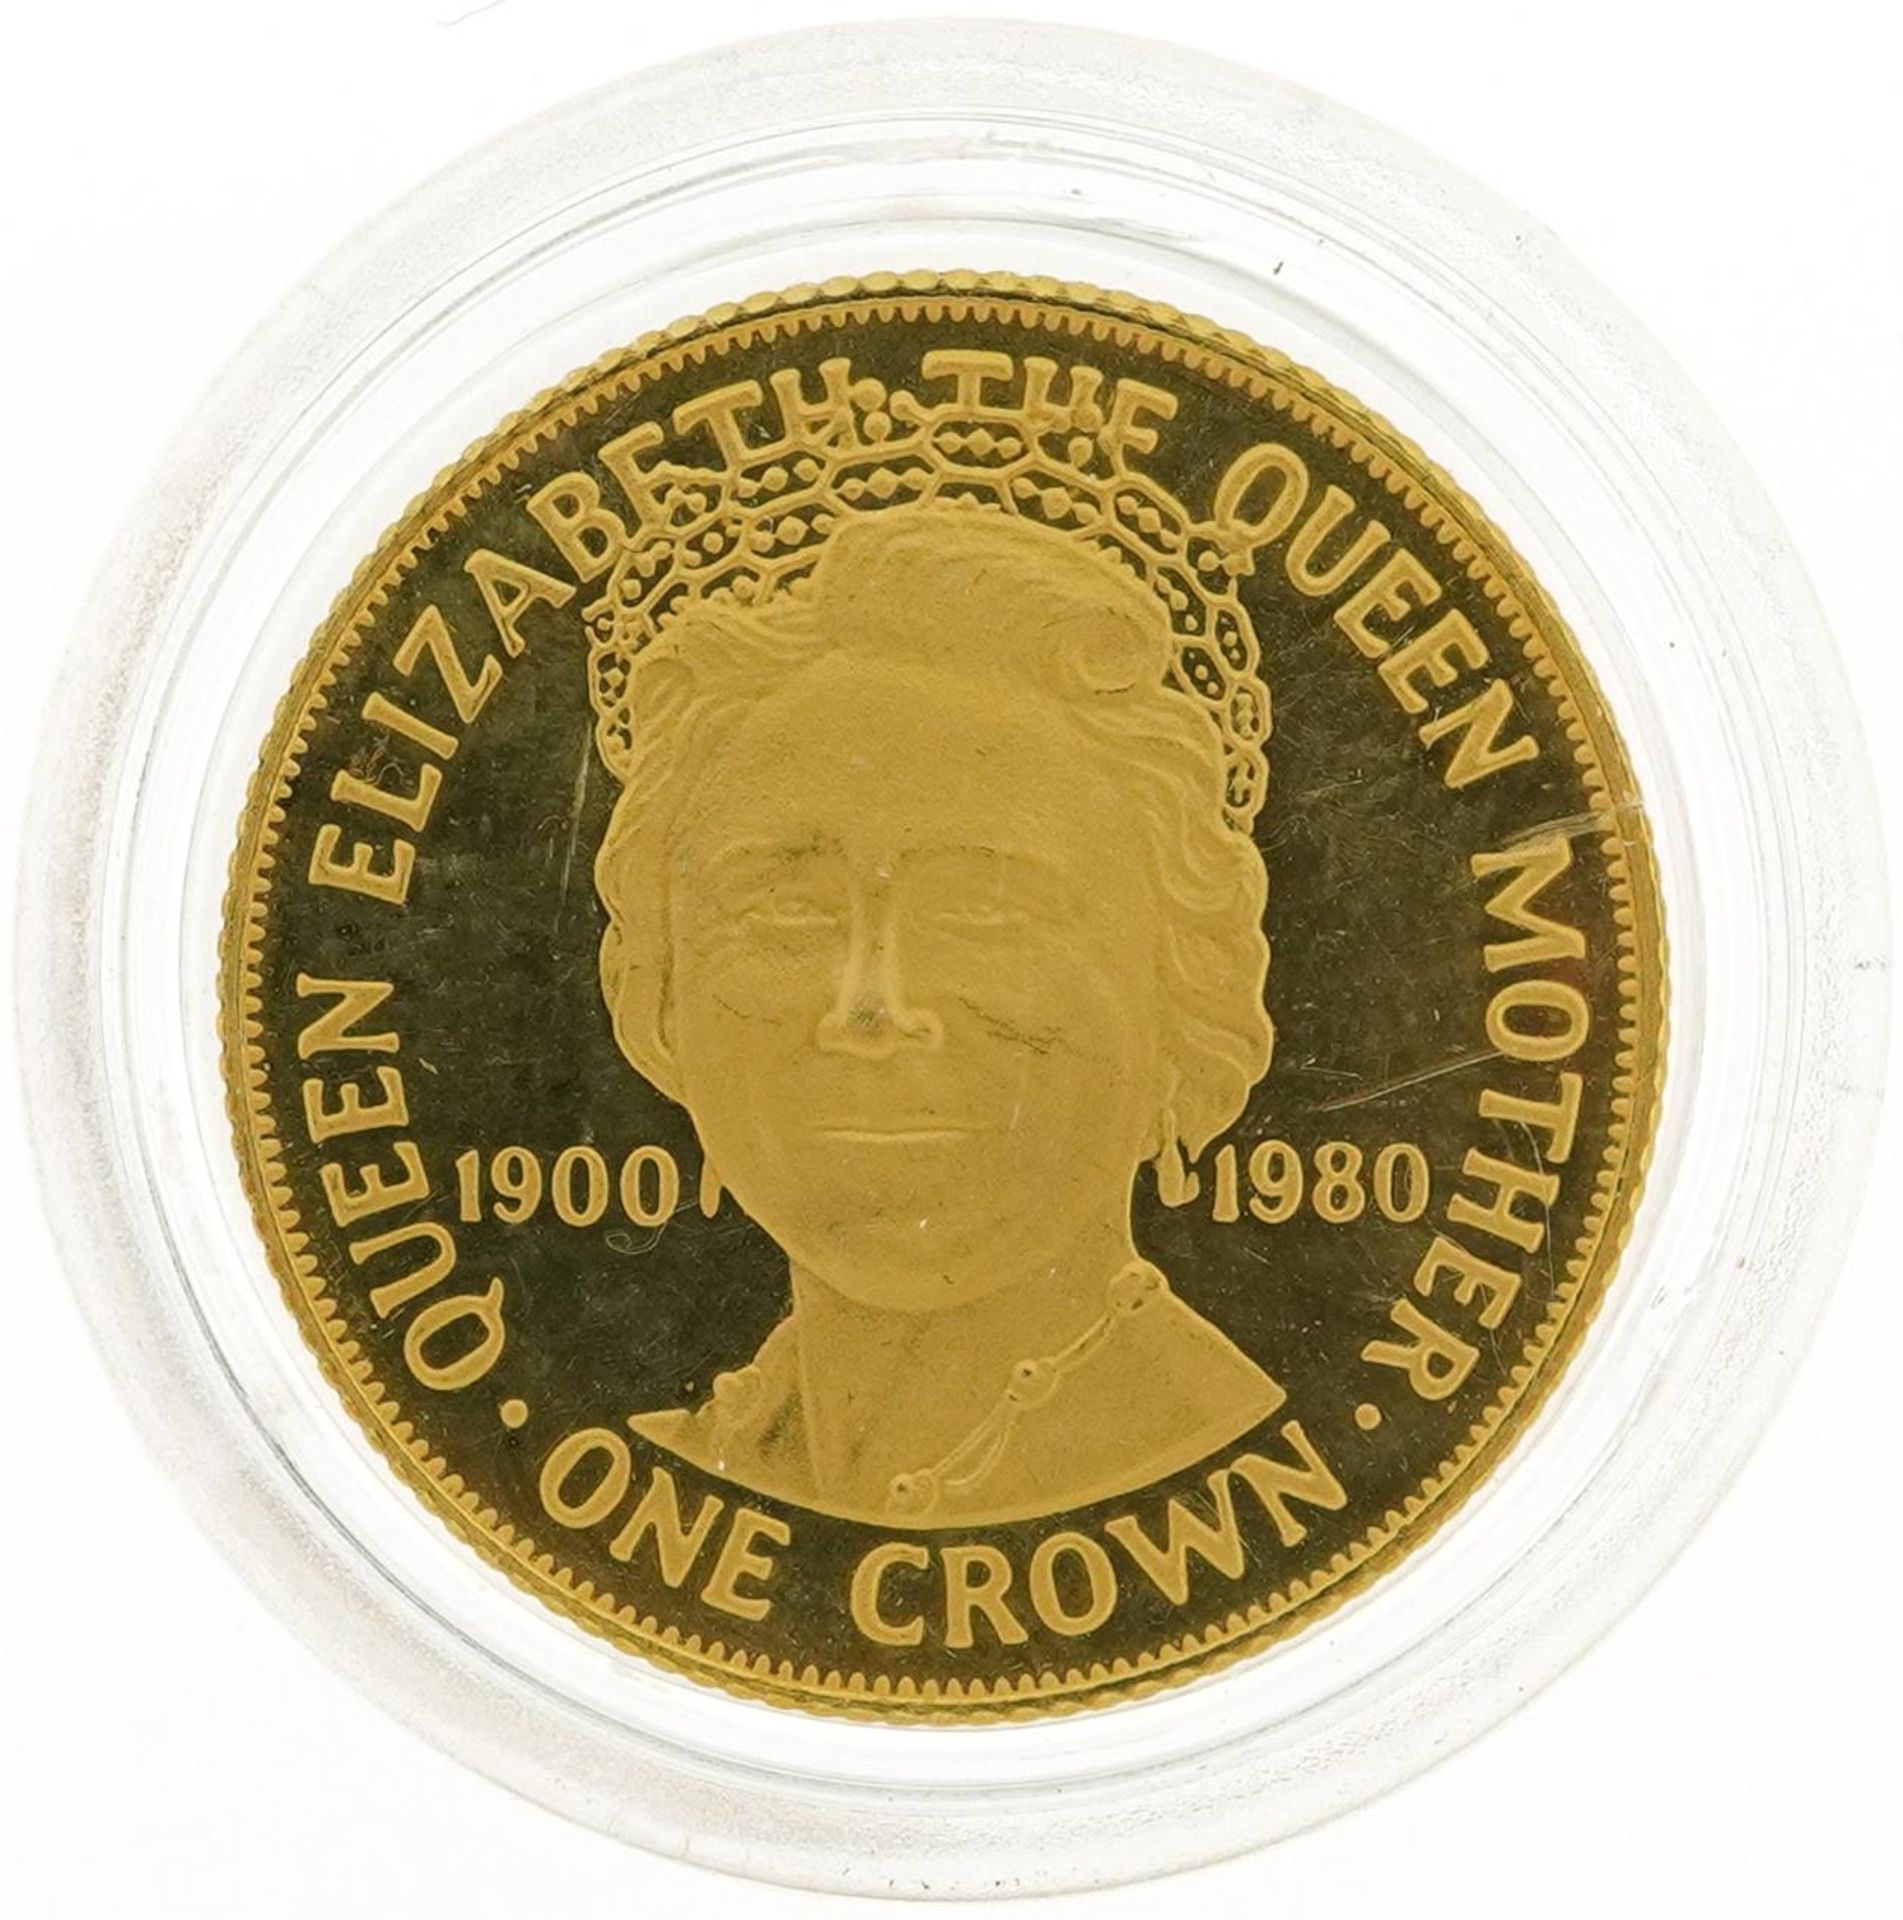 Elizabeth II Isle of Man 1980 gold proof crown commemorating Queen Mother's 80th birthday